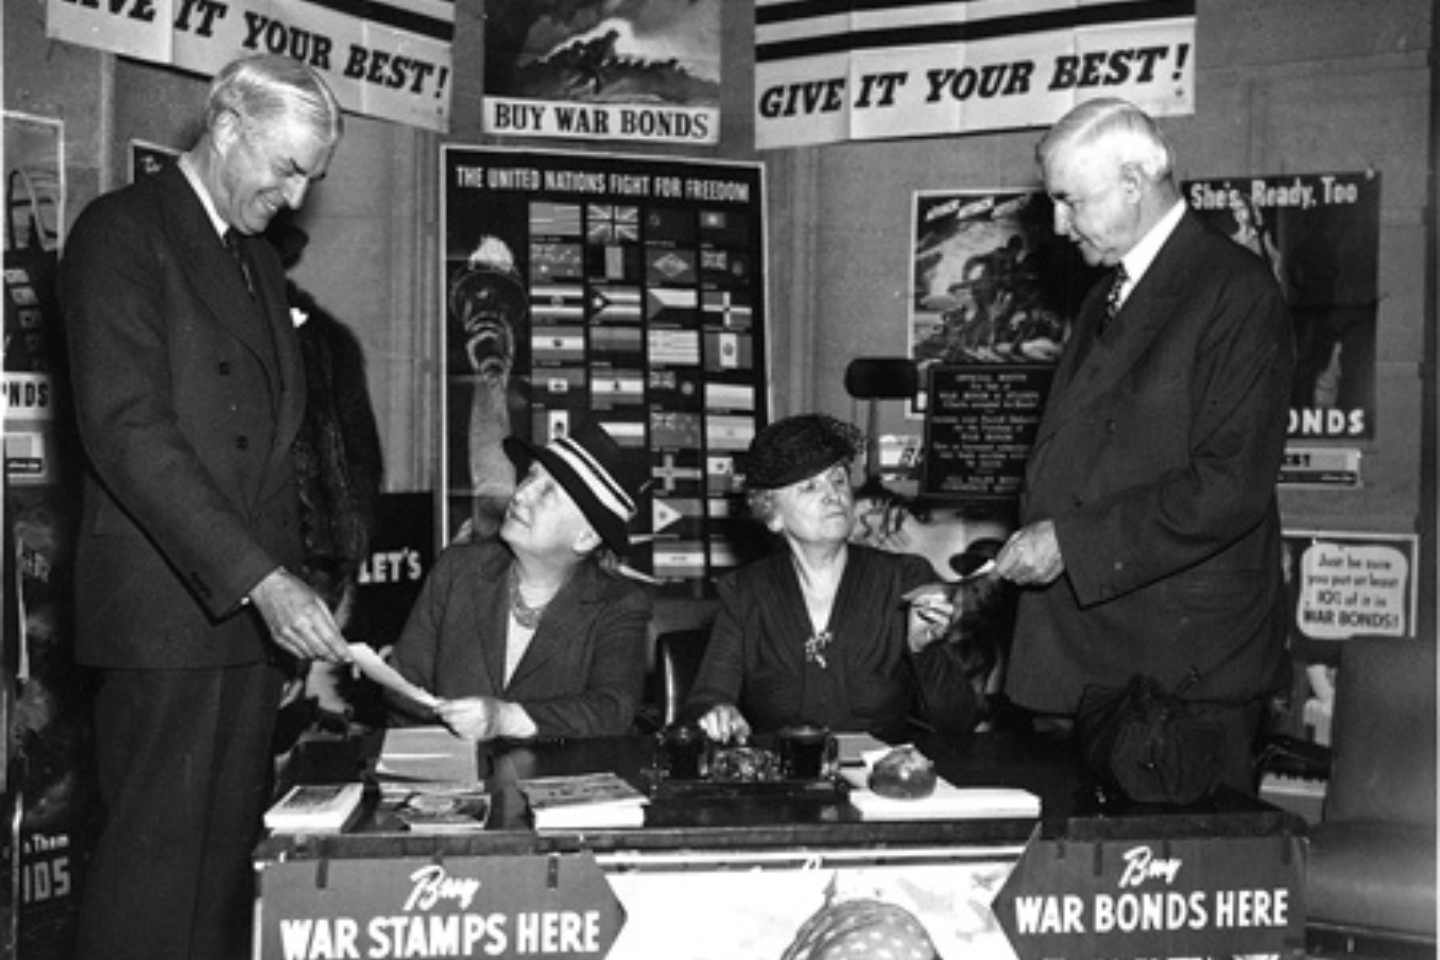 Susan Vaughn Clayton and Mary Gibbs Jones sell war bonds from a desk in the RFC building. Photo courtesy of Rice University’s Woodson Research Center.